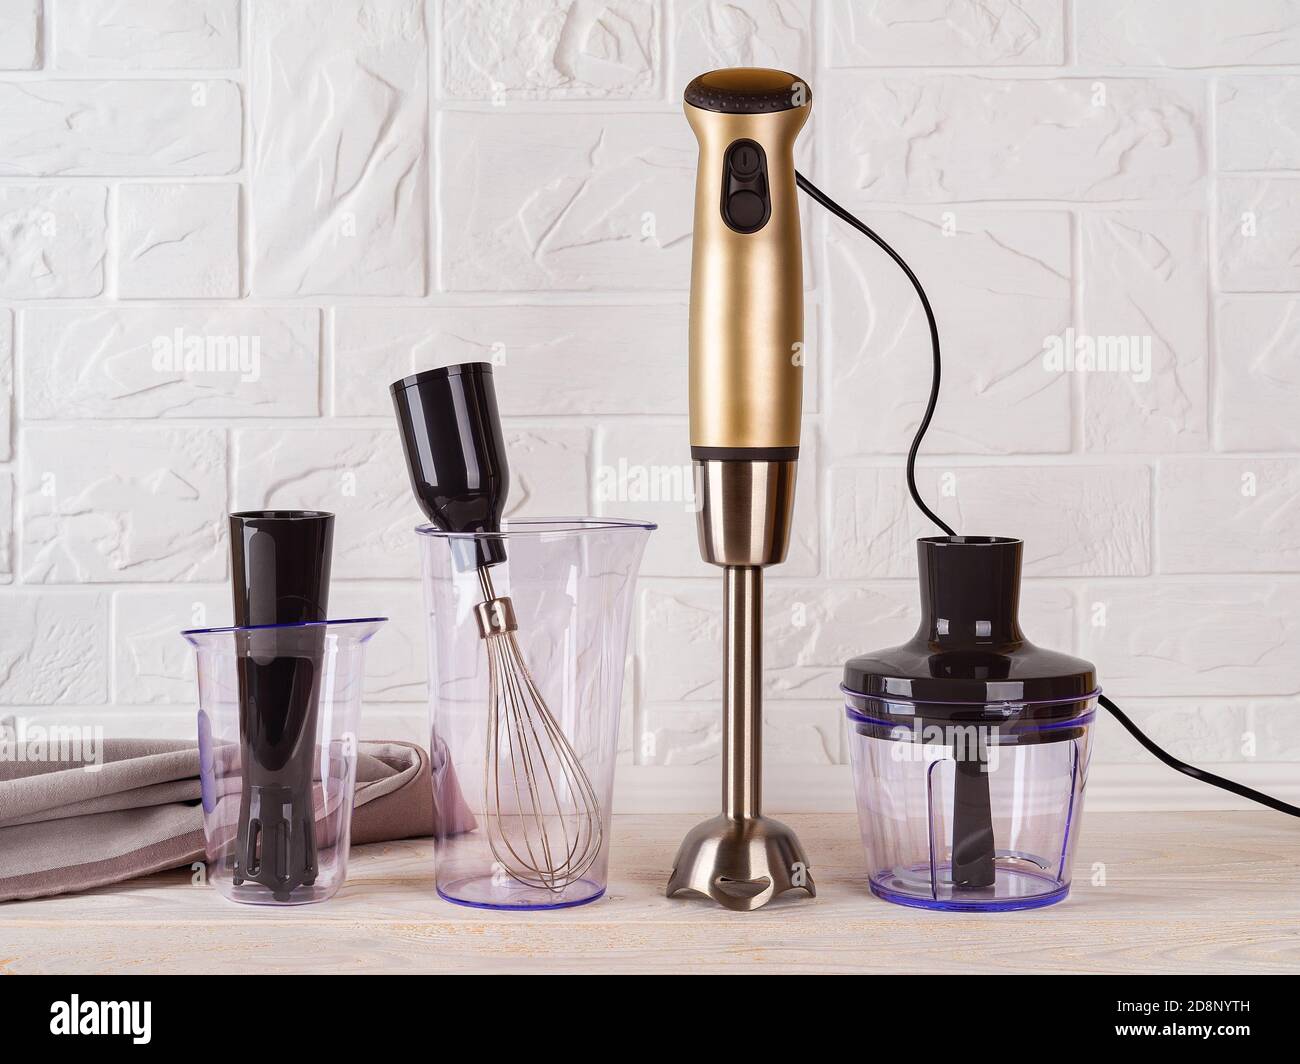 https://c8.alamy.com/comp/2D8NYTH/immersion-hand-blender-with-different-attachments-and-two-cups-on-wood-table-electric-kitchen-appliances-for-making-sauces-smoothies-puree-2D8NYTH.jpg